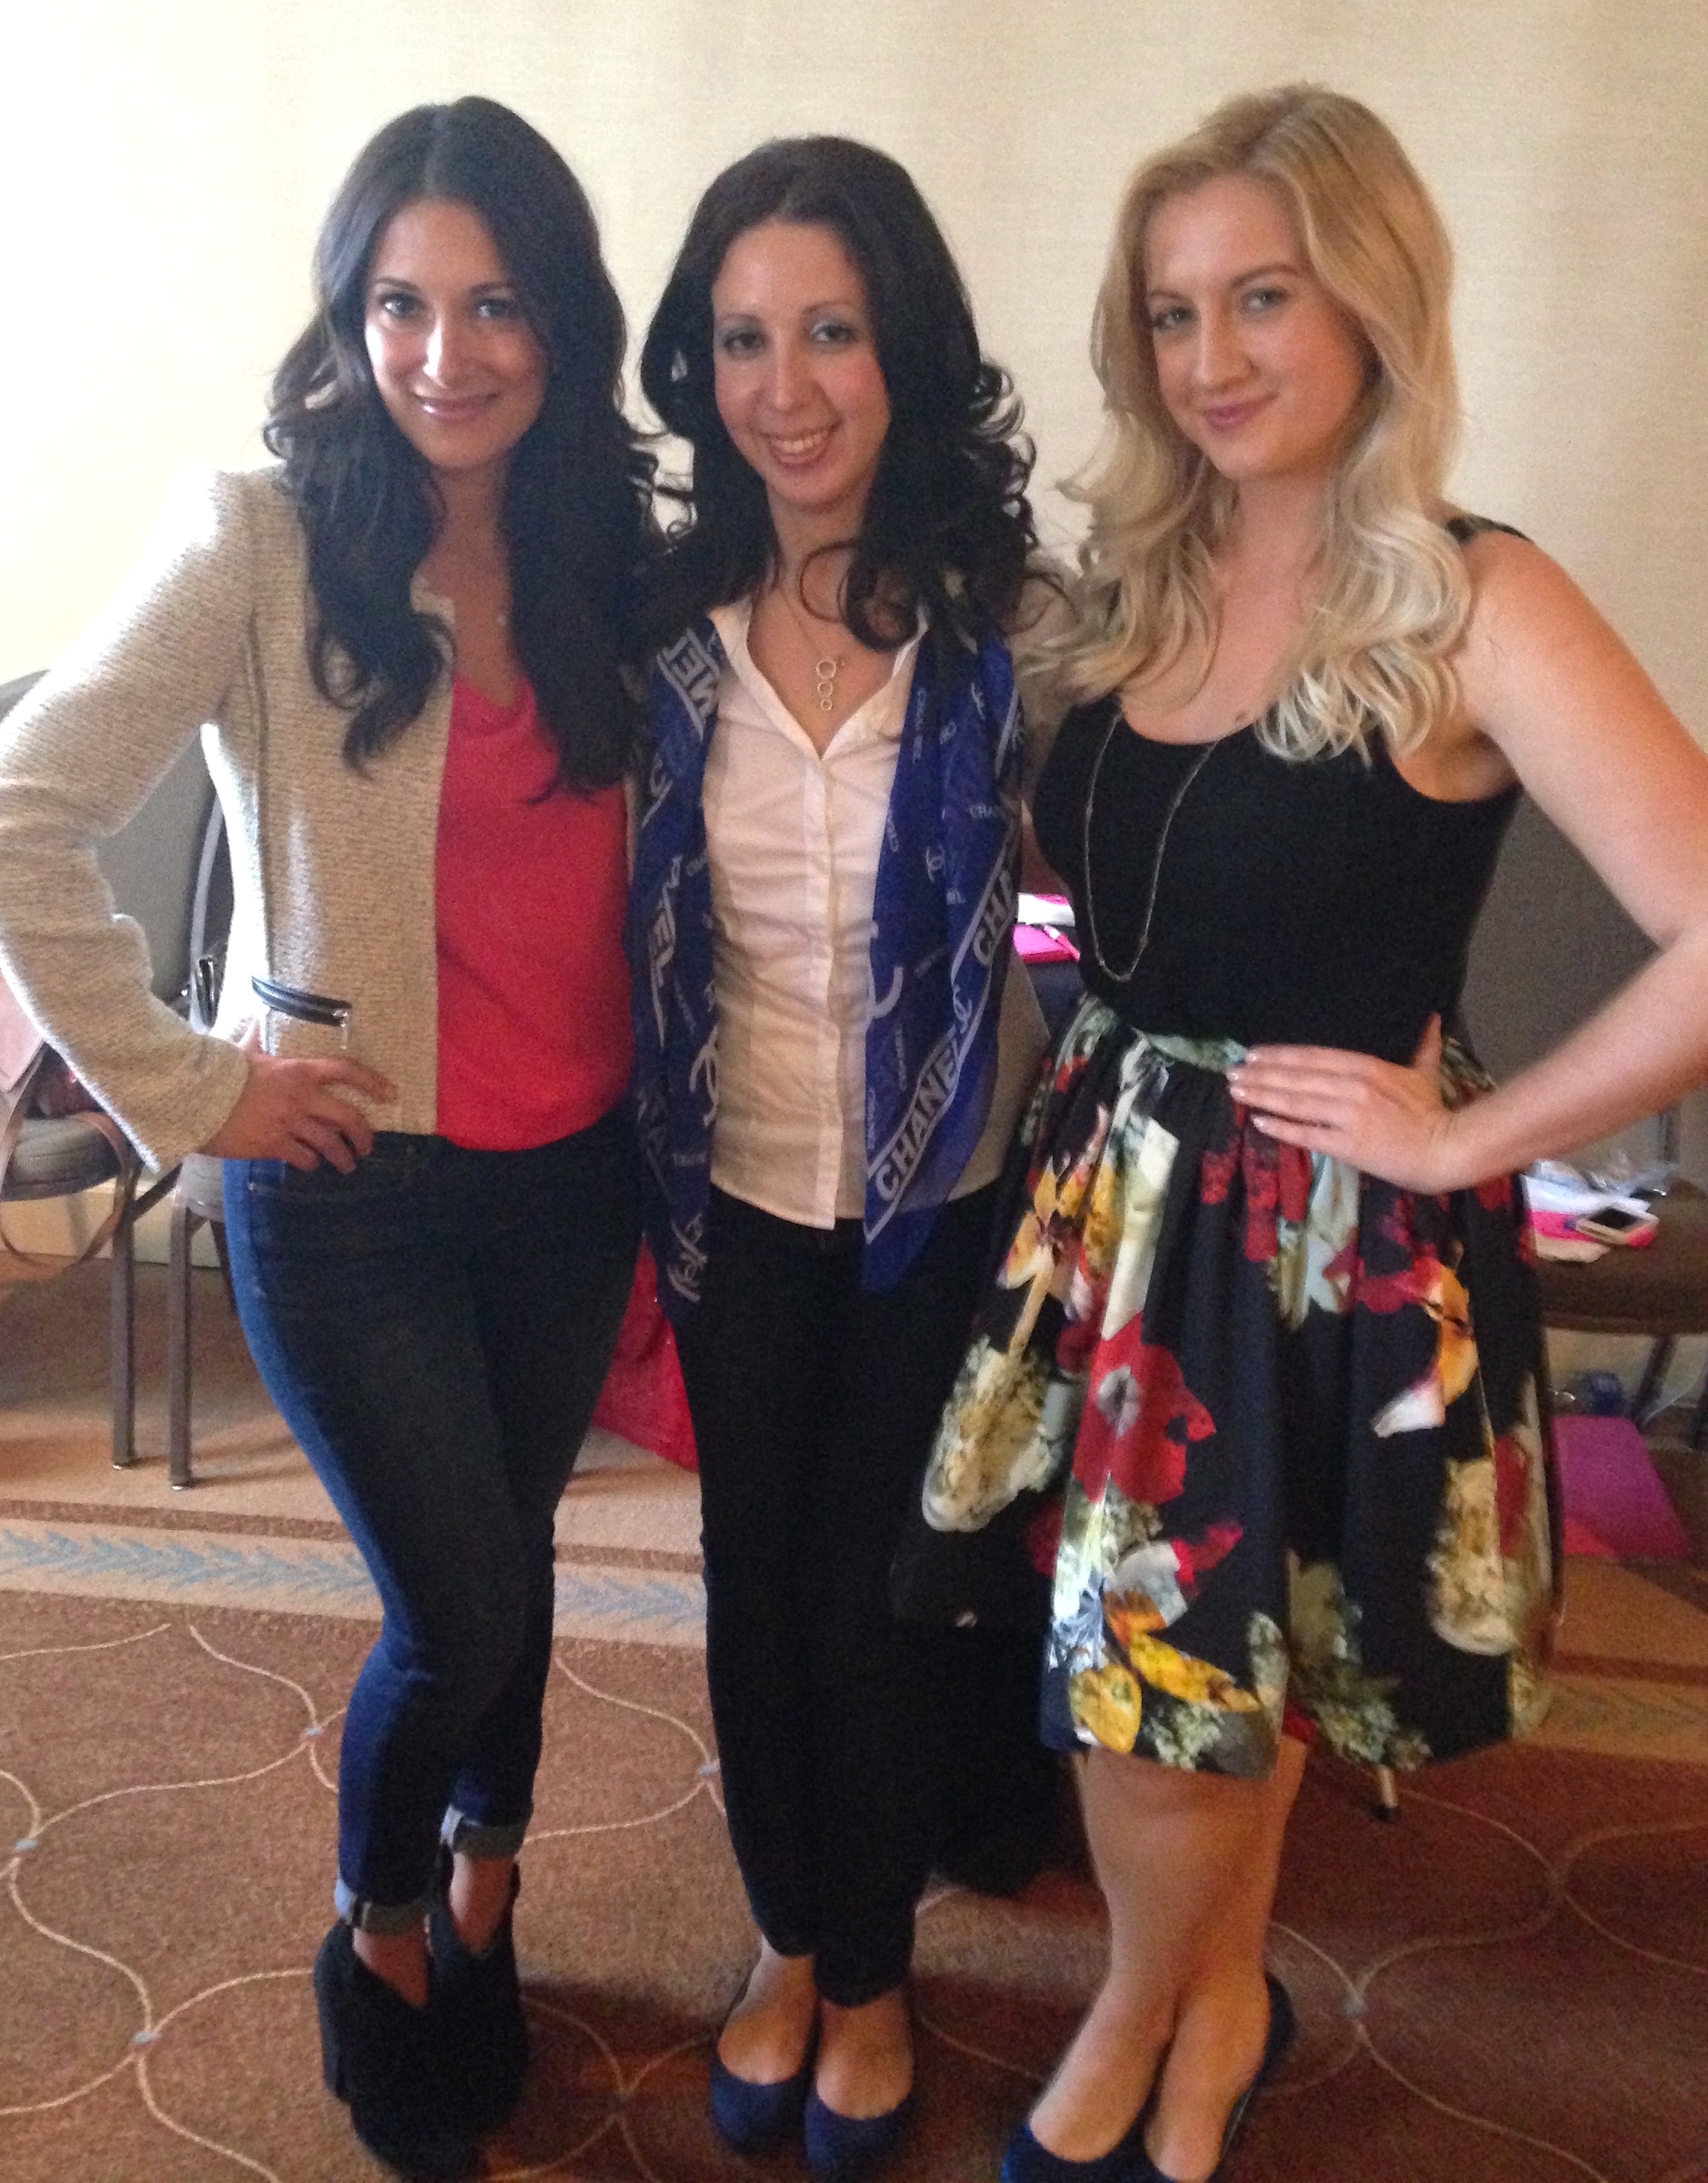 Actresses Laura Linda Bradley and Angelique Cabral at the Proud and Pretty in Pink Body Image Workshop March 16th 2014